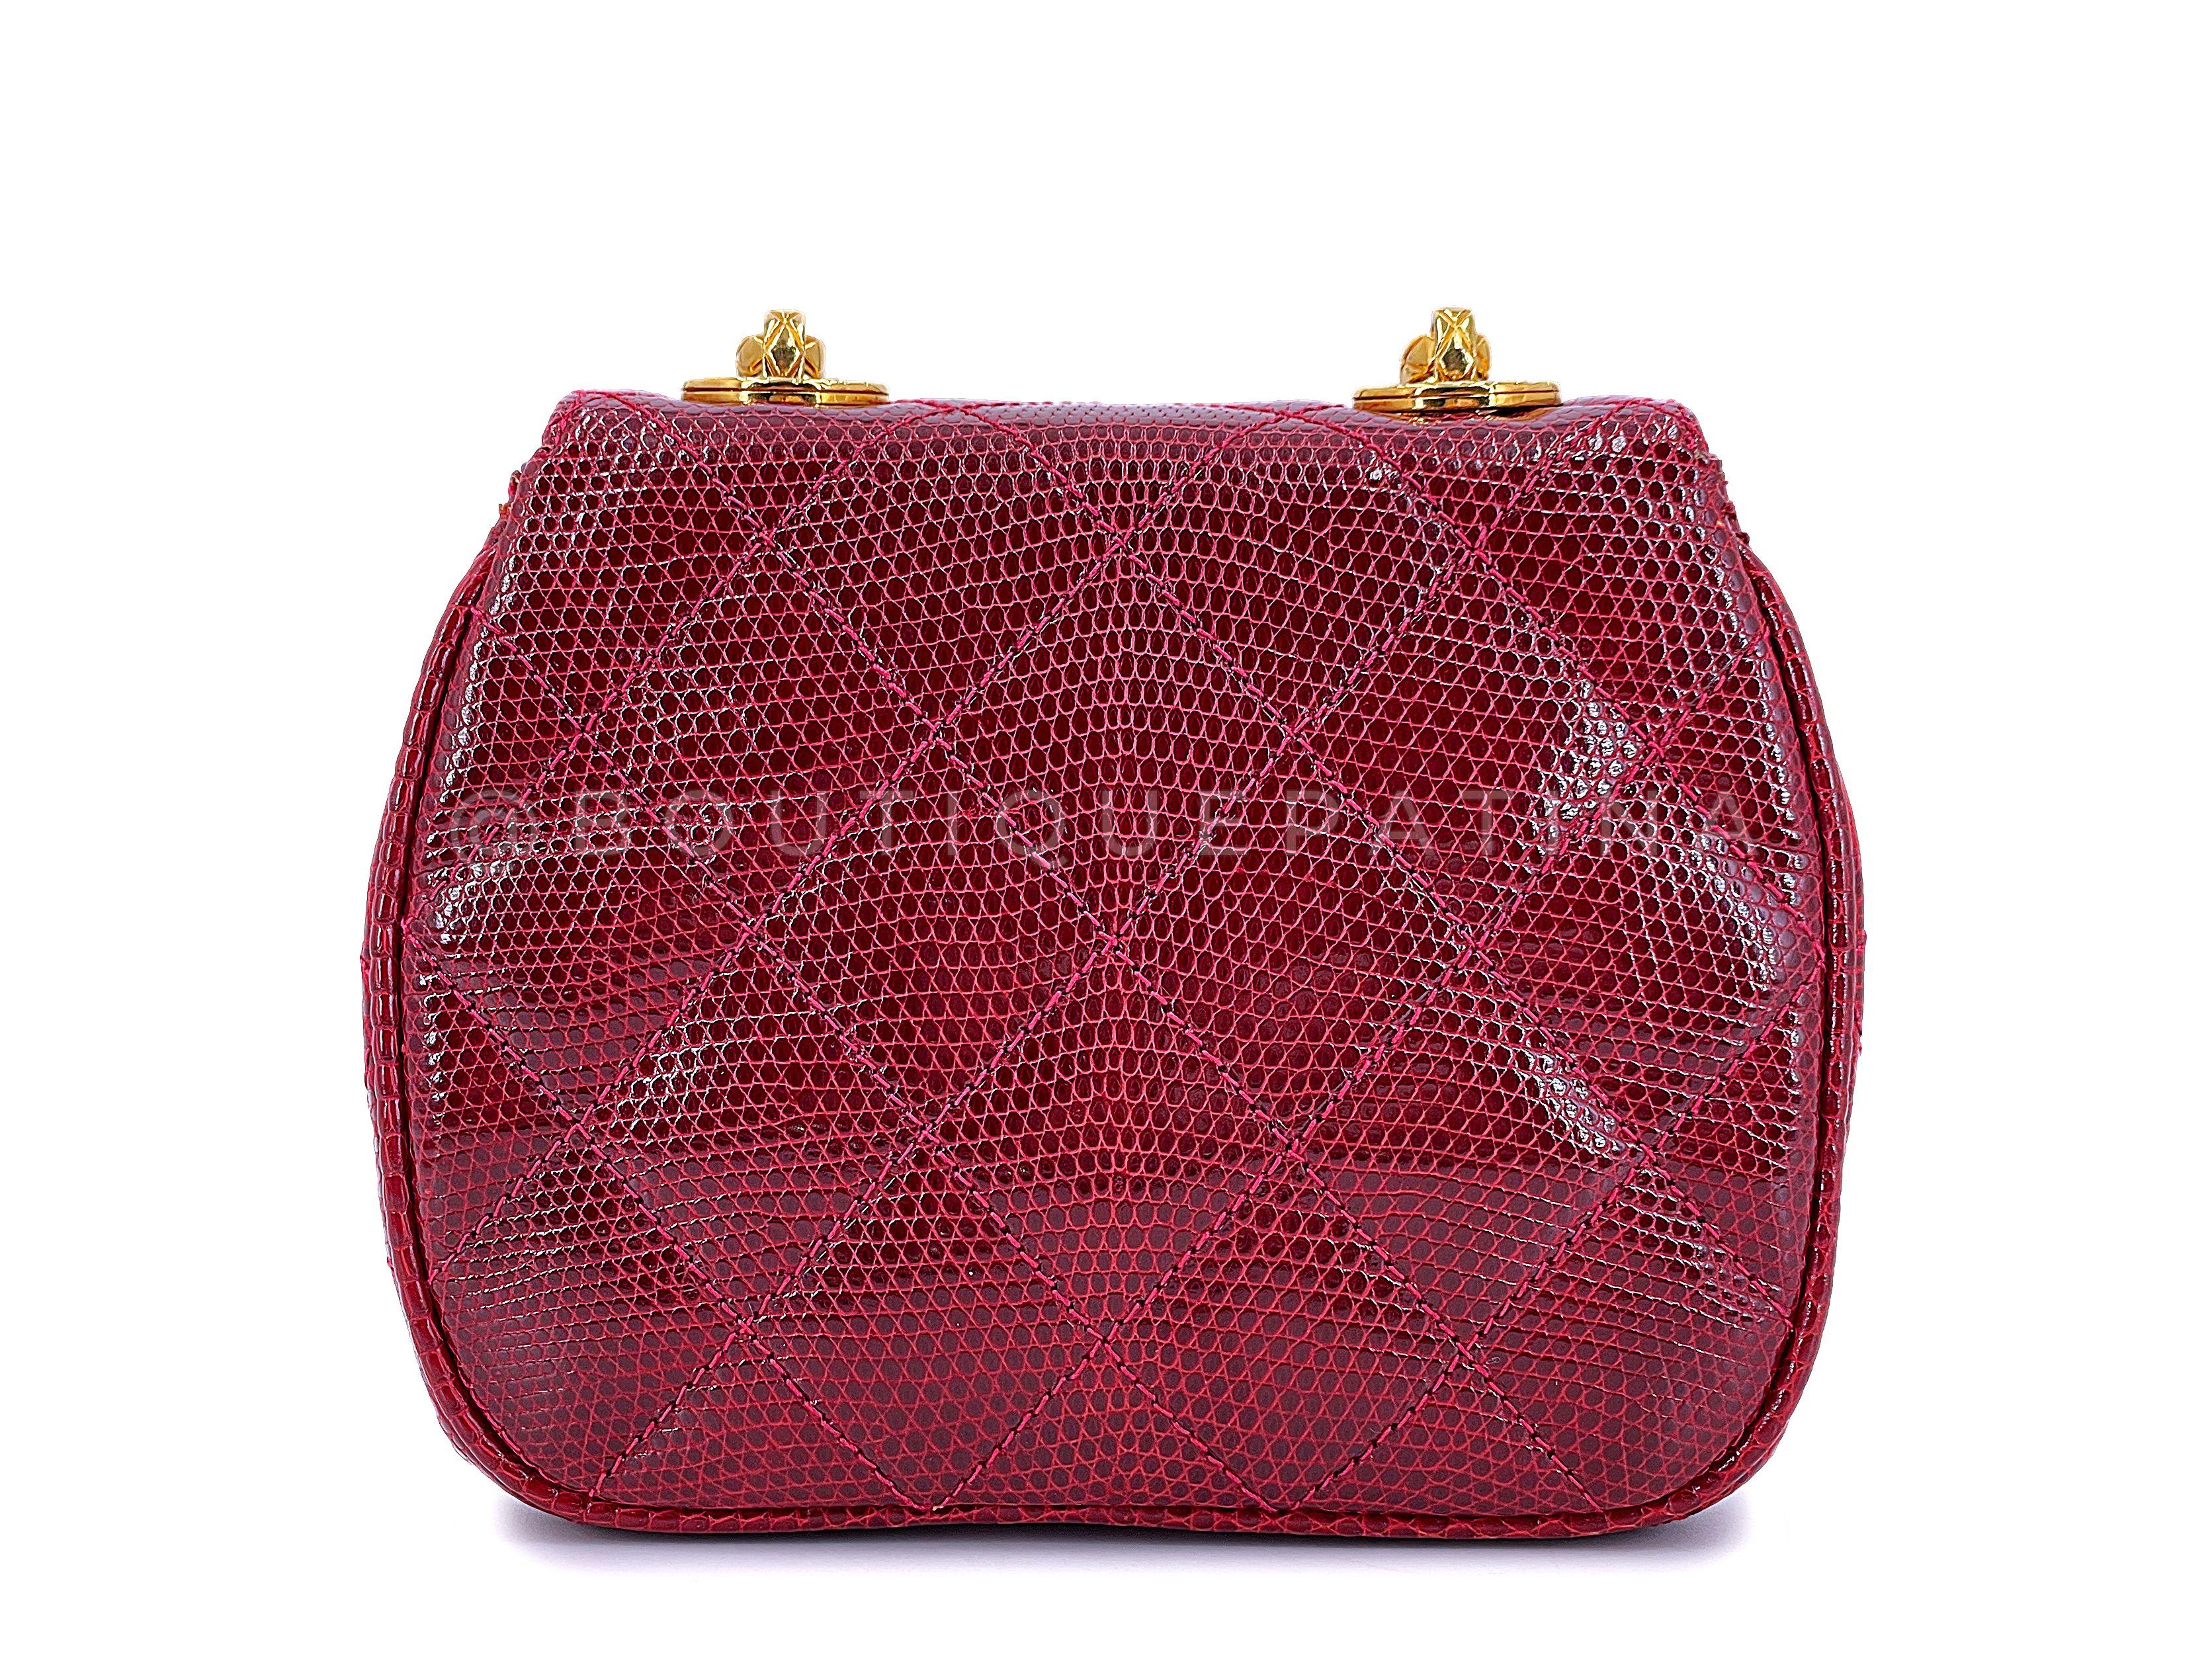 Rare Chanel 1980s Vintage Red Lizard Etched Chain Round Mini Flap Bag 67290 For Sale 1